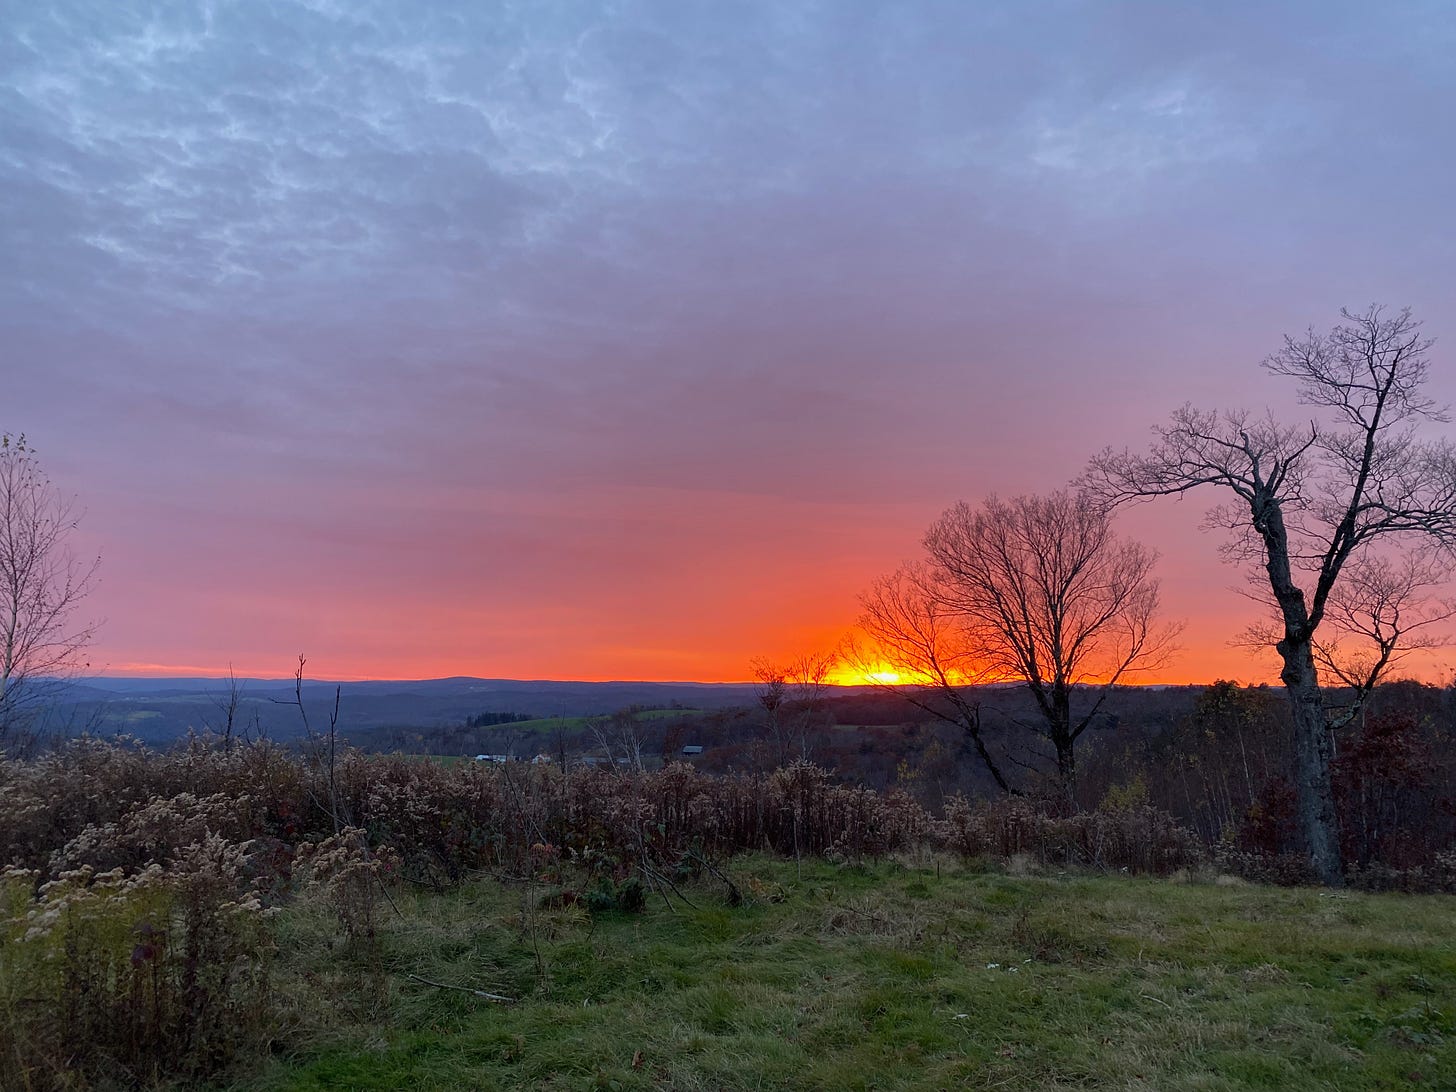 View of a brilliant sunset from a ridgetop. The sky is red, pink, and purple, the sun a golden orb low on the horizon. Two bare black trees are silhouetted against the sky.